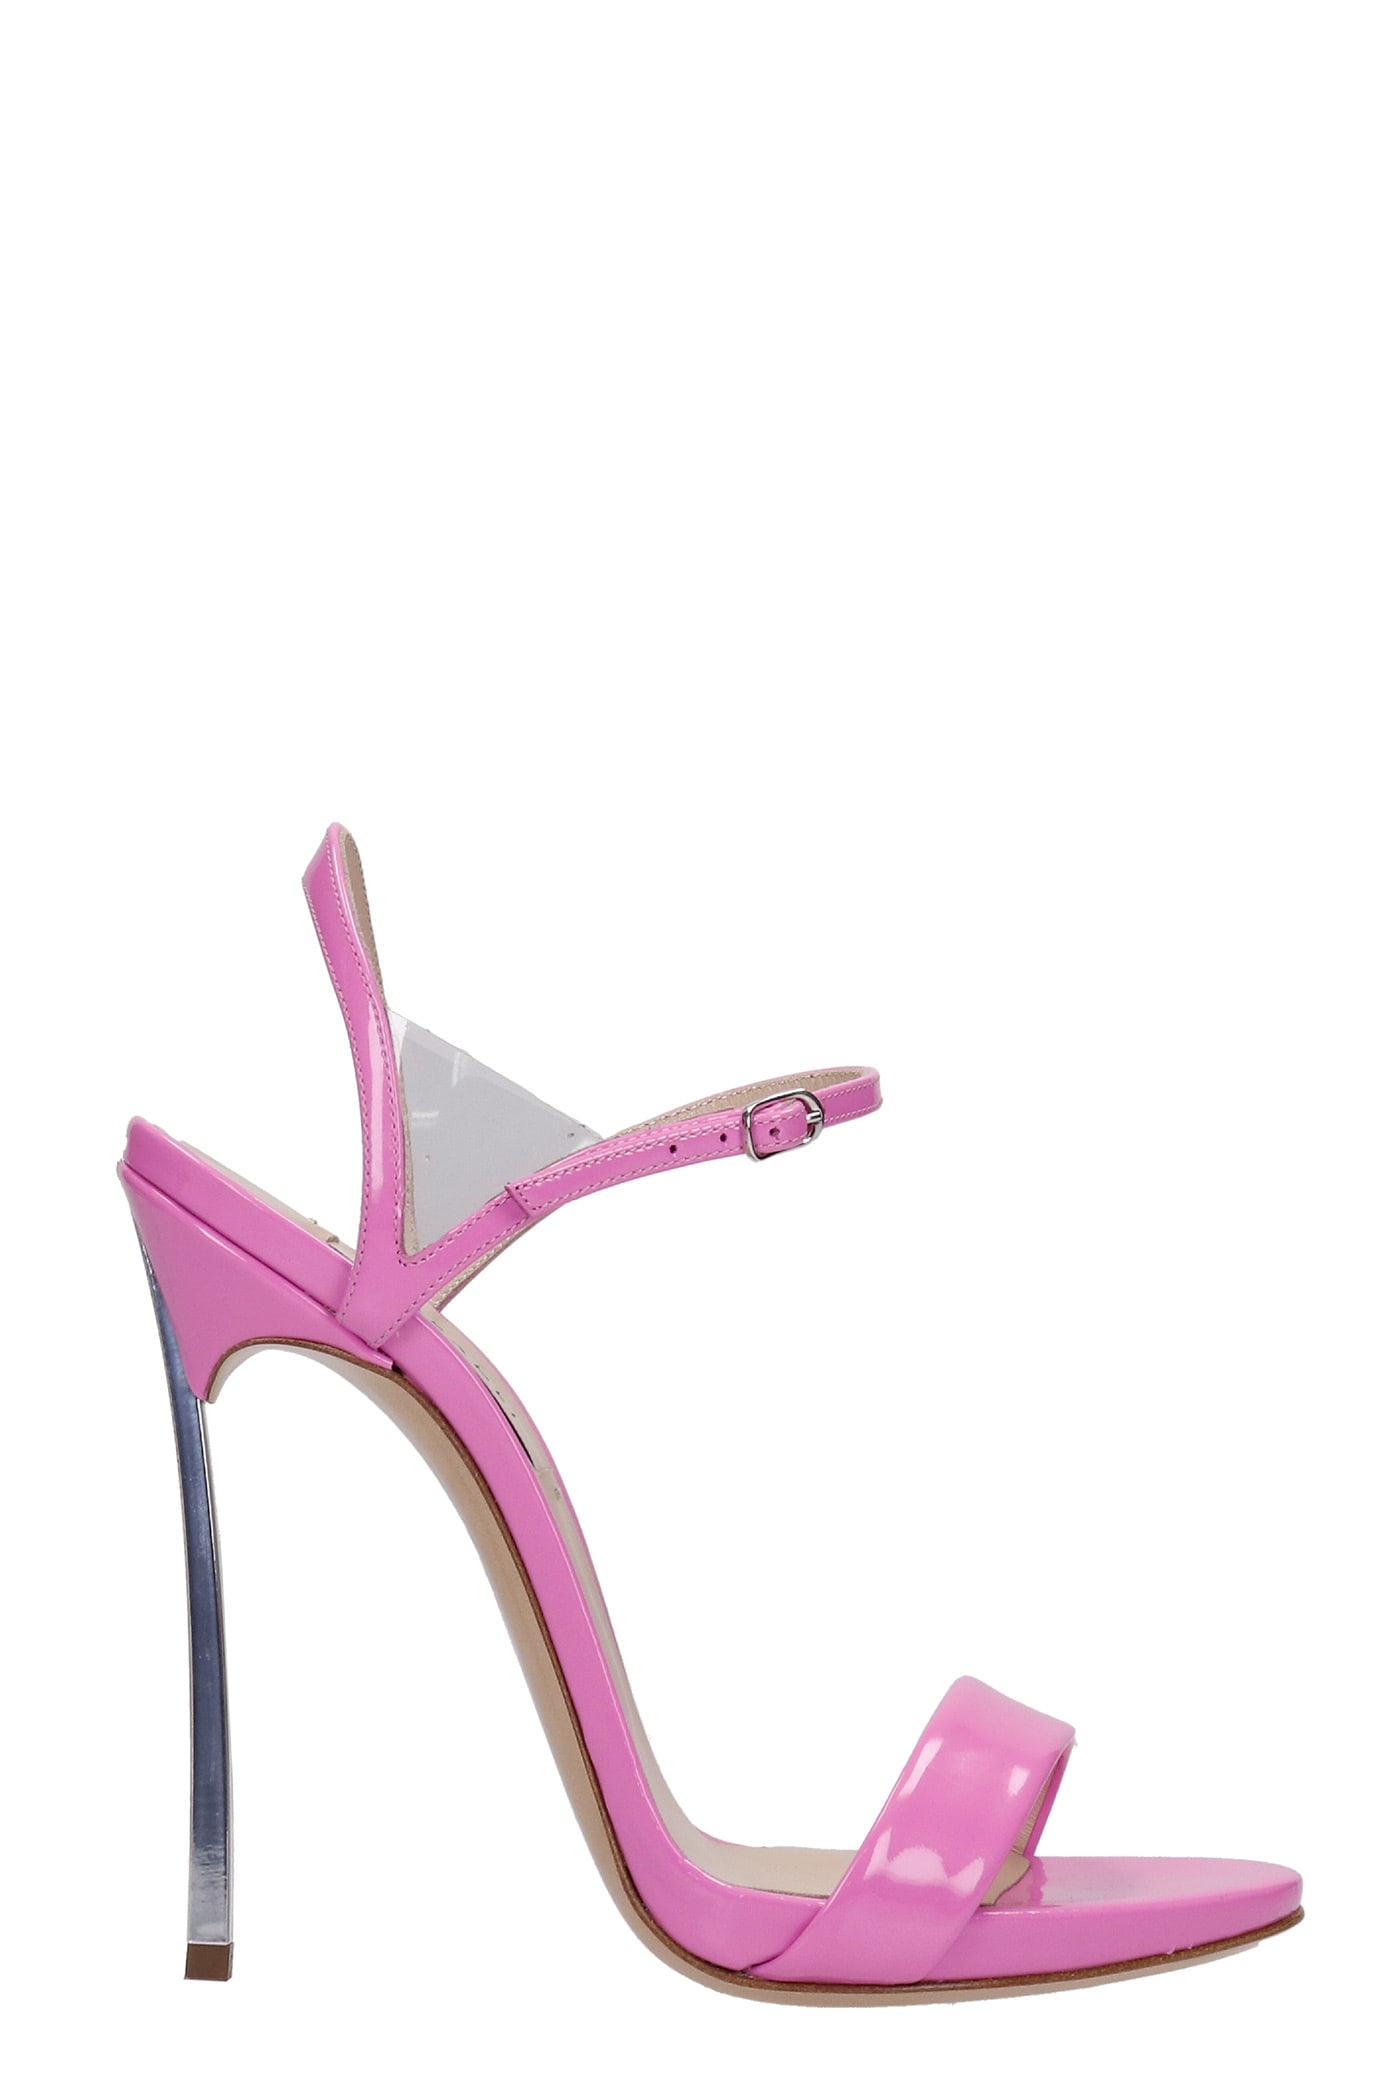 Casadei Sandals In Rose-pink Patent Leather